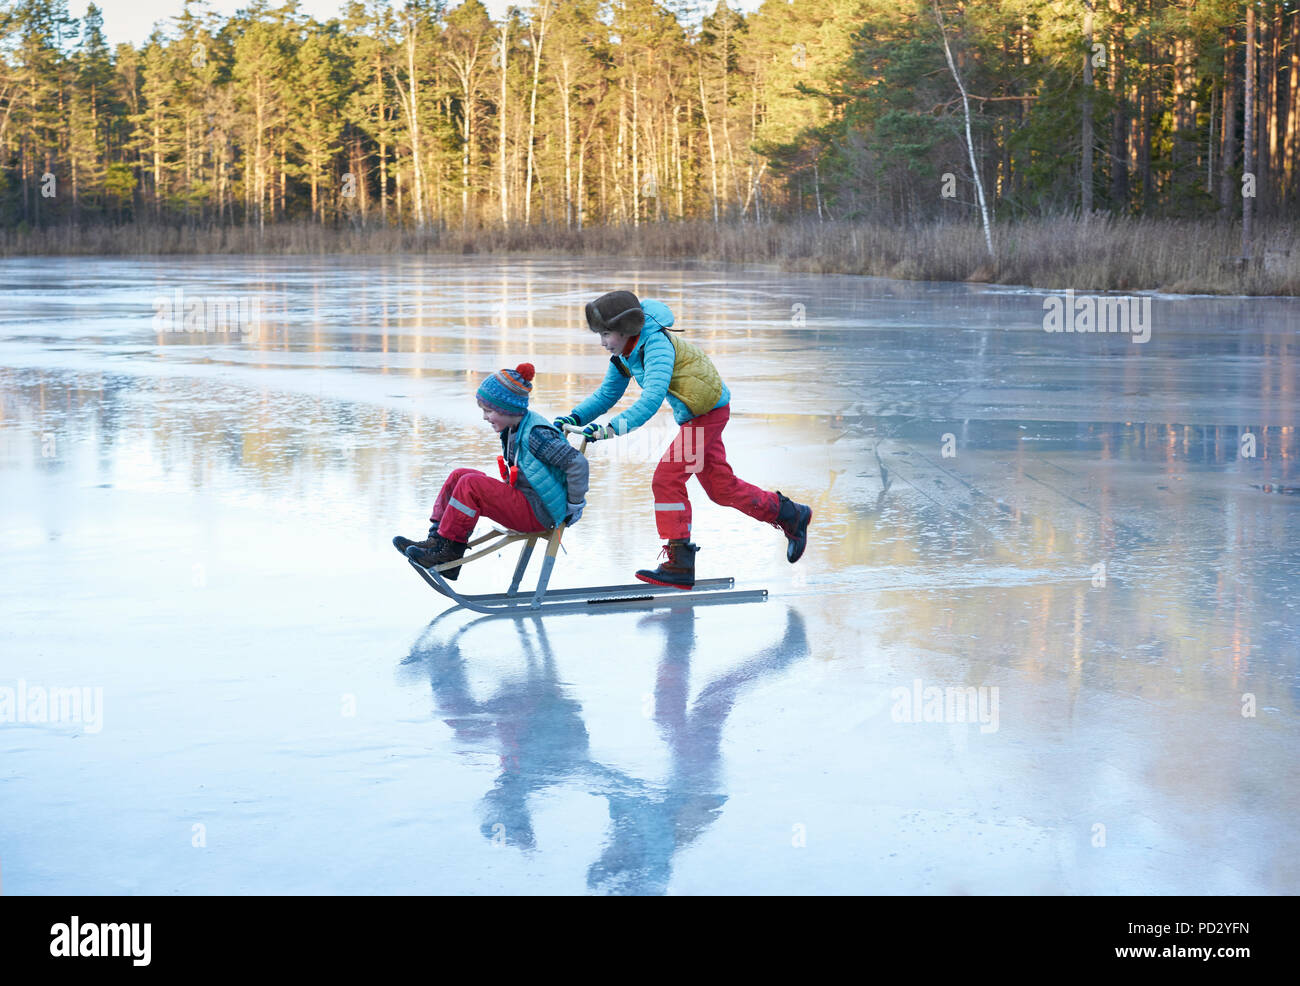 Boy pushing his brother on sleigh across frozen lake Stock Photo